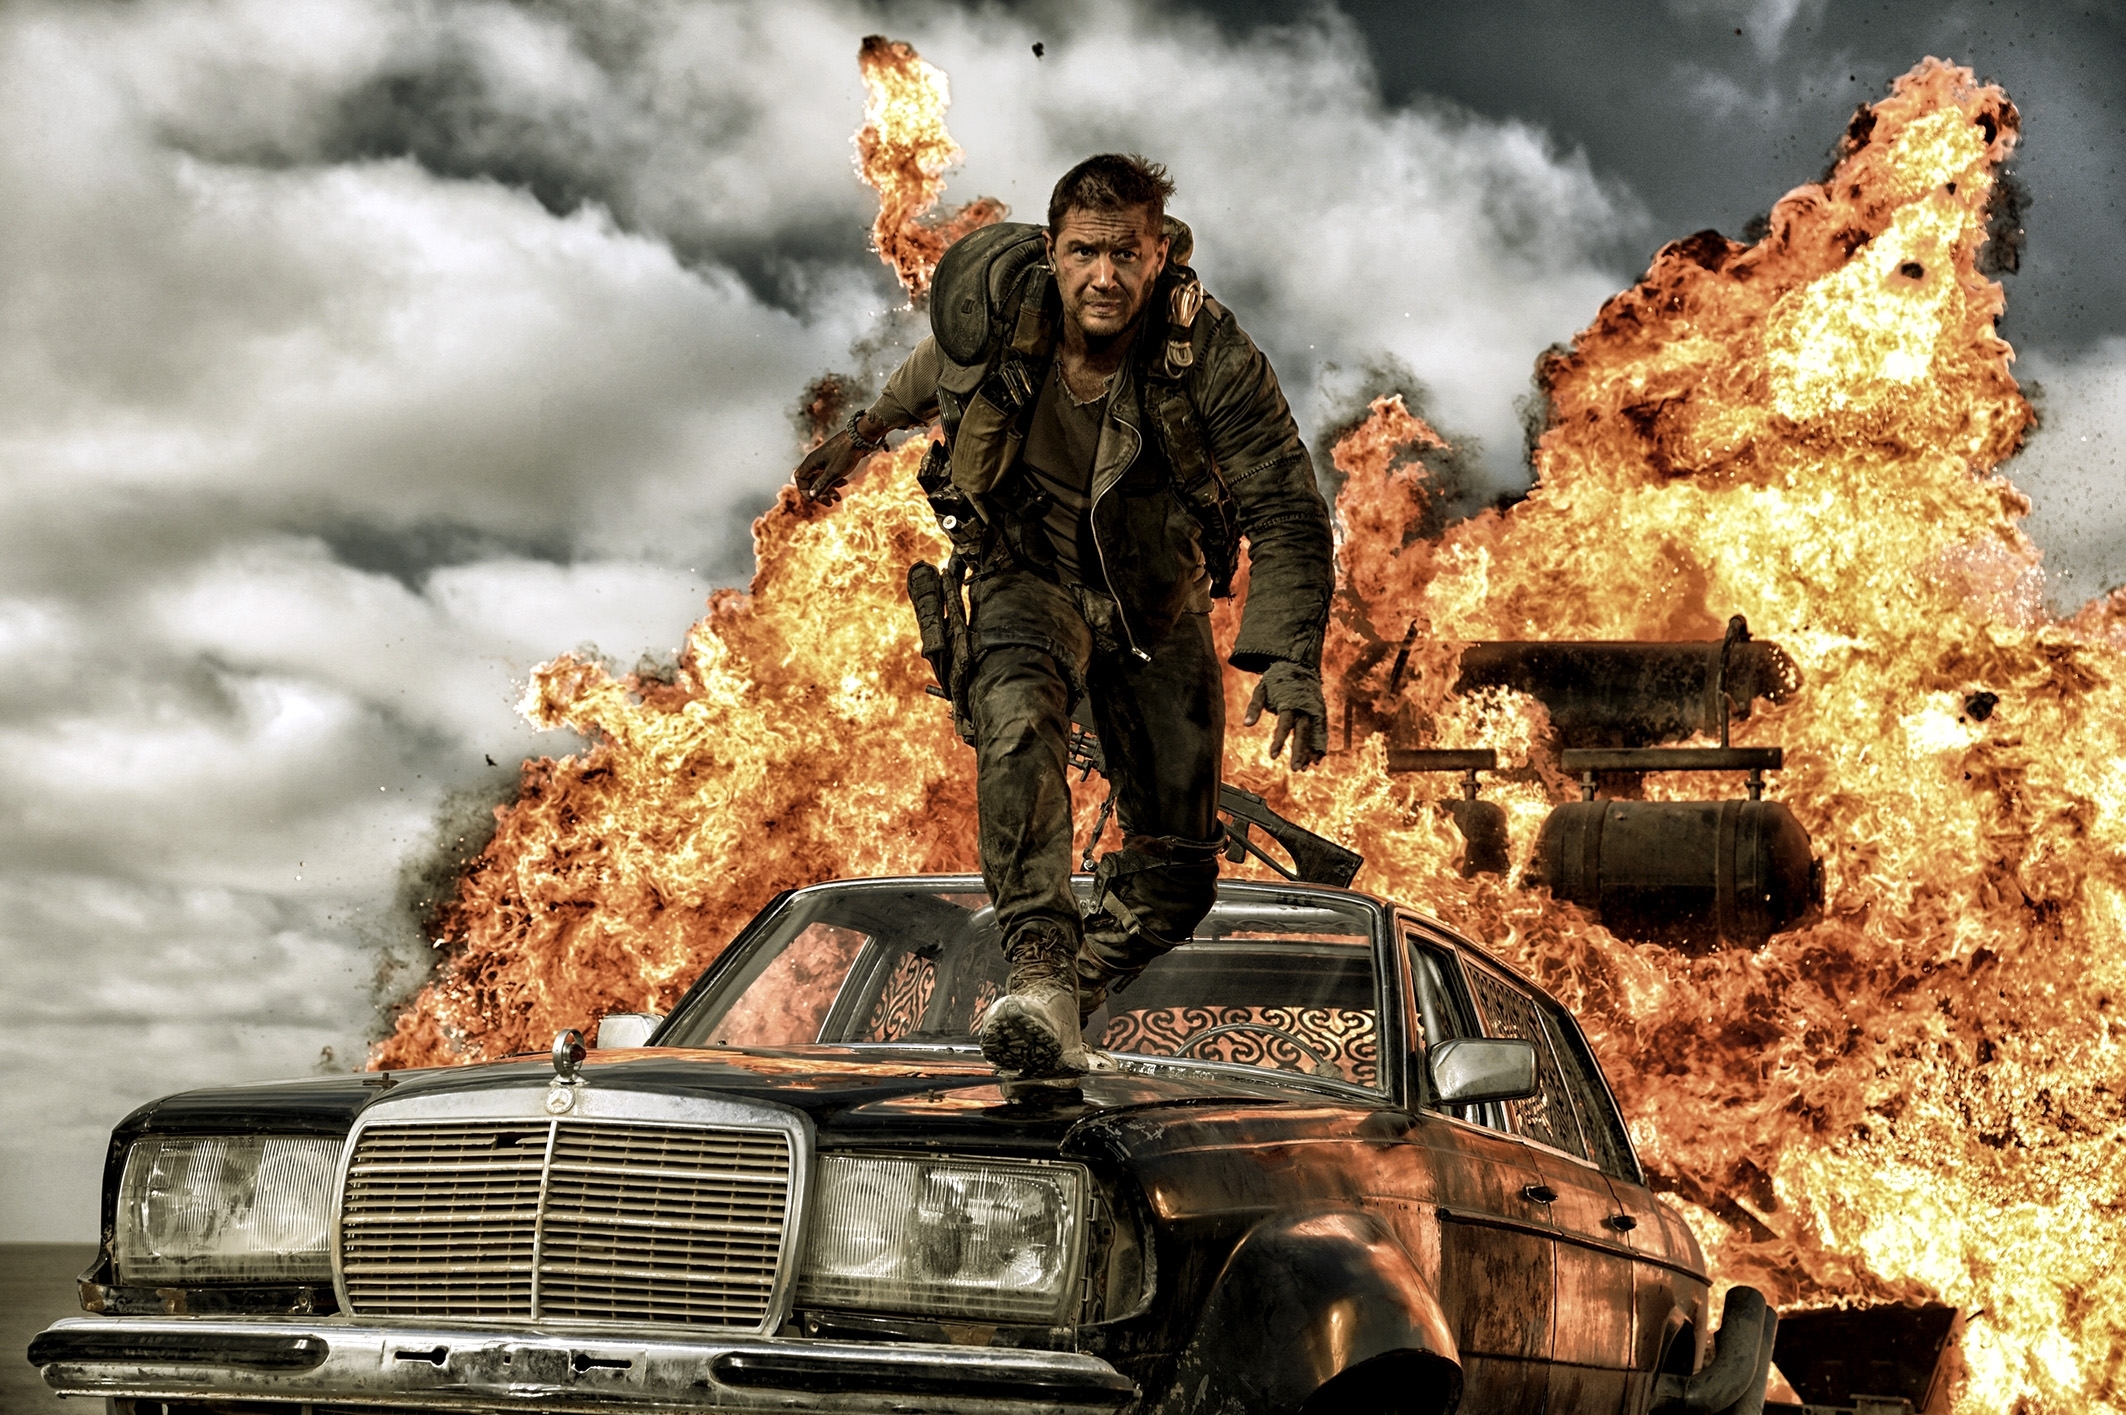 Image du film Mad Max : Fury Road 680d755a-e88c-473a-a76b-878bbefec5bf